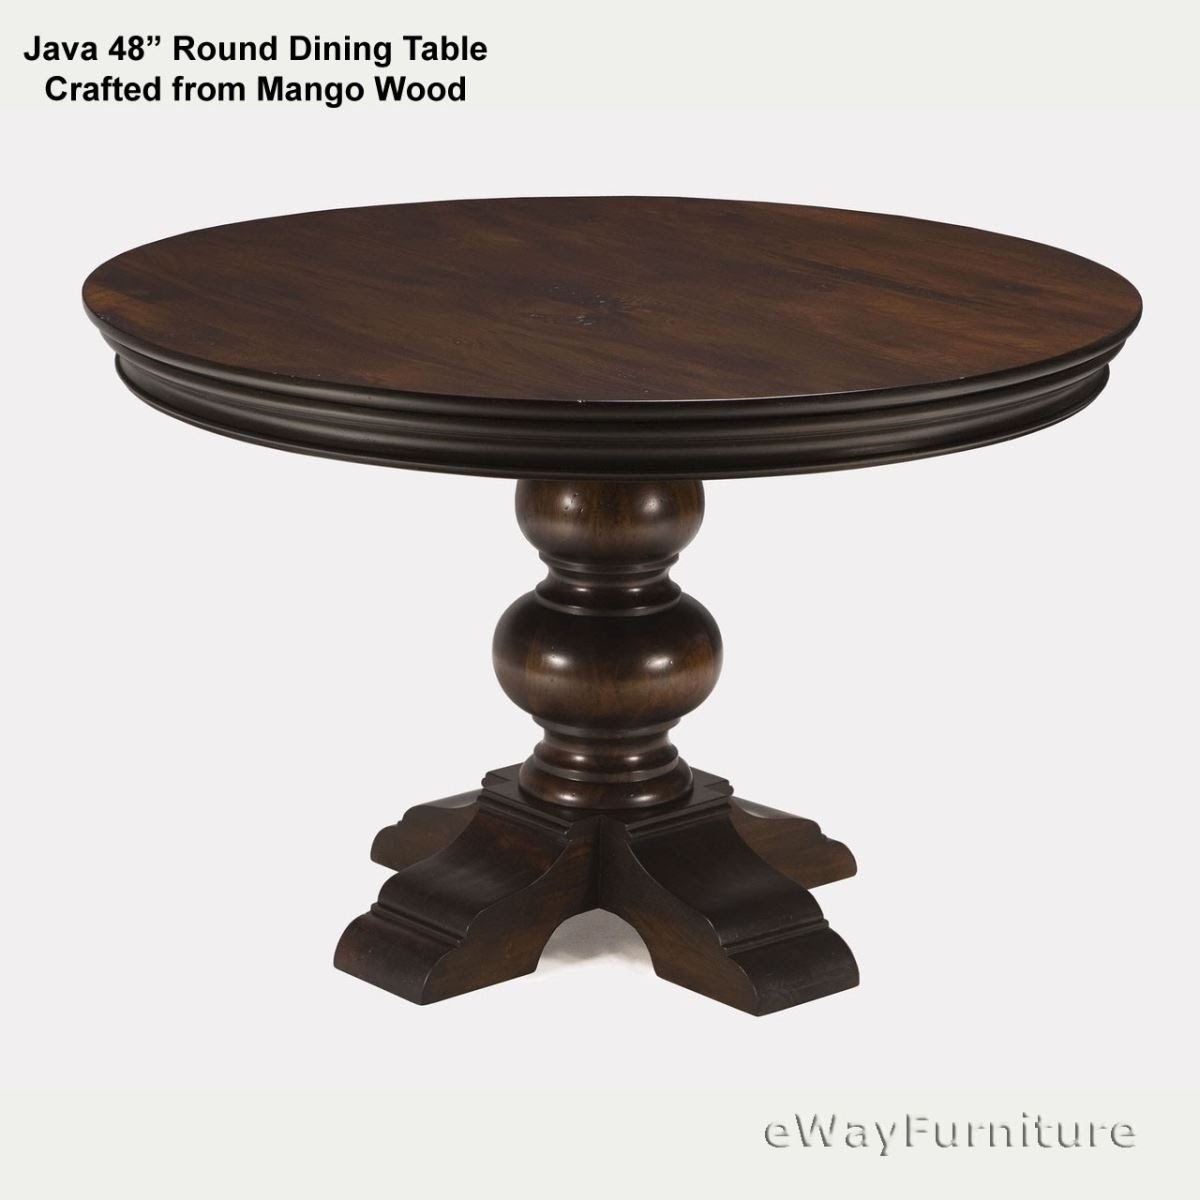 48 Inch Round Dining Table You Ll Love, 48 Inch Round Pedestal Table With Leaf